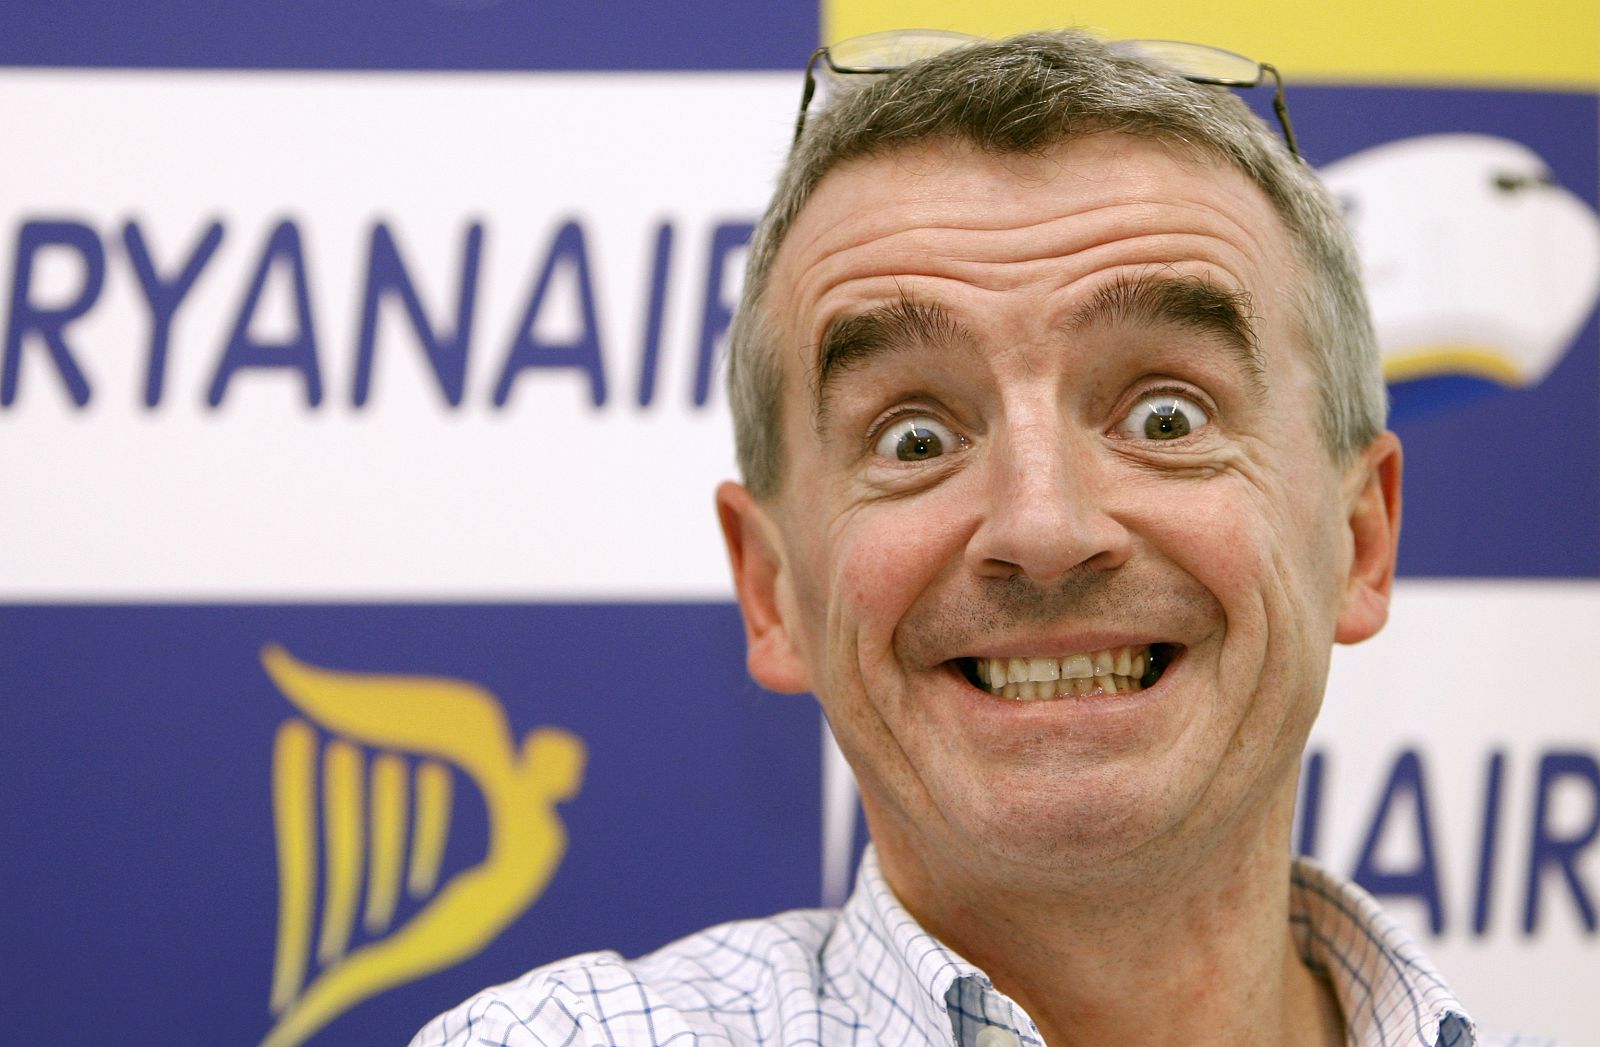 Ryanair CEO O'Leary holds a news conference in Brussels